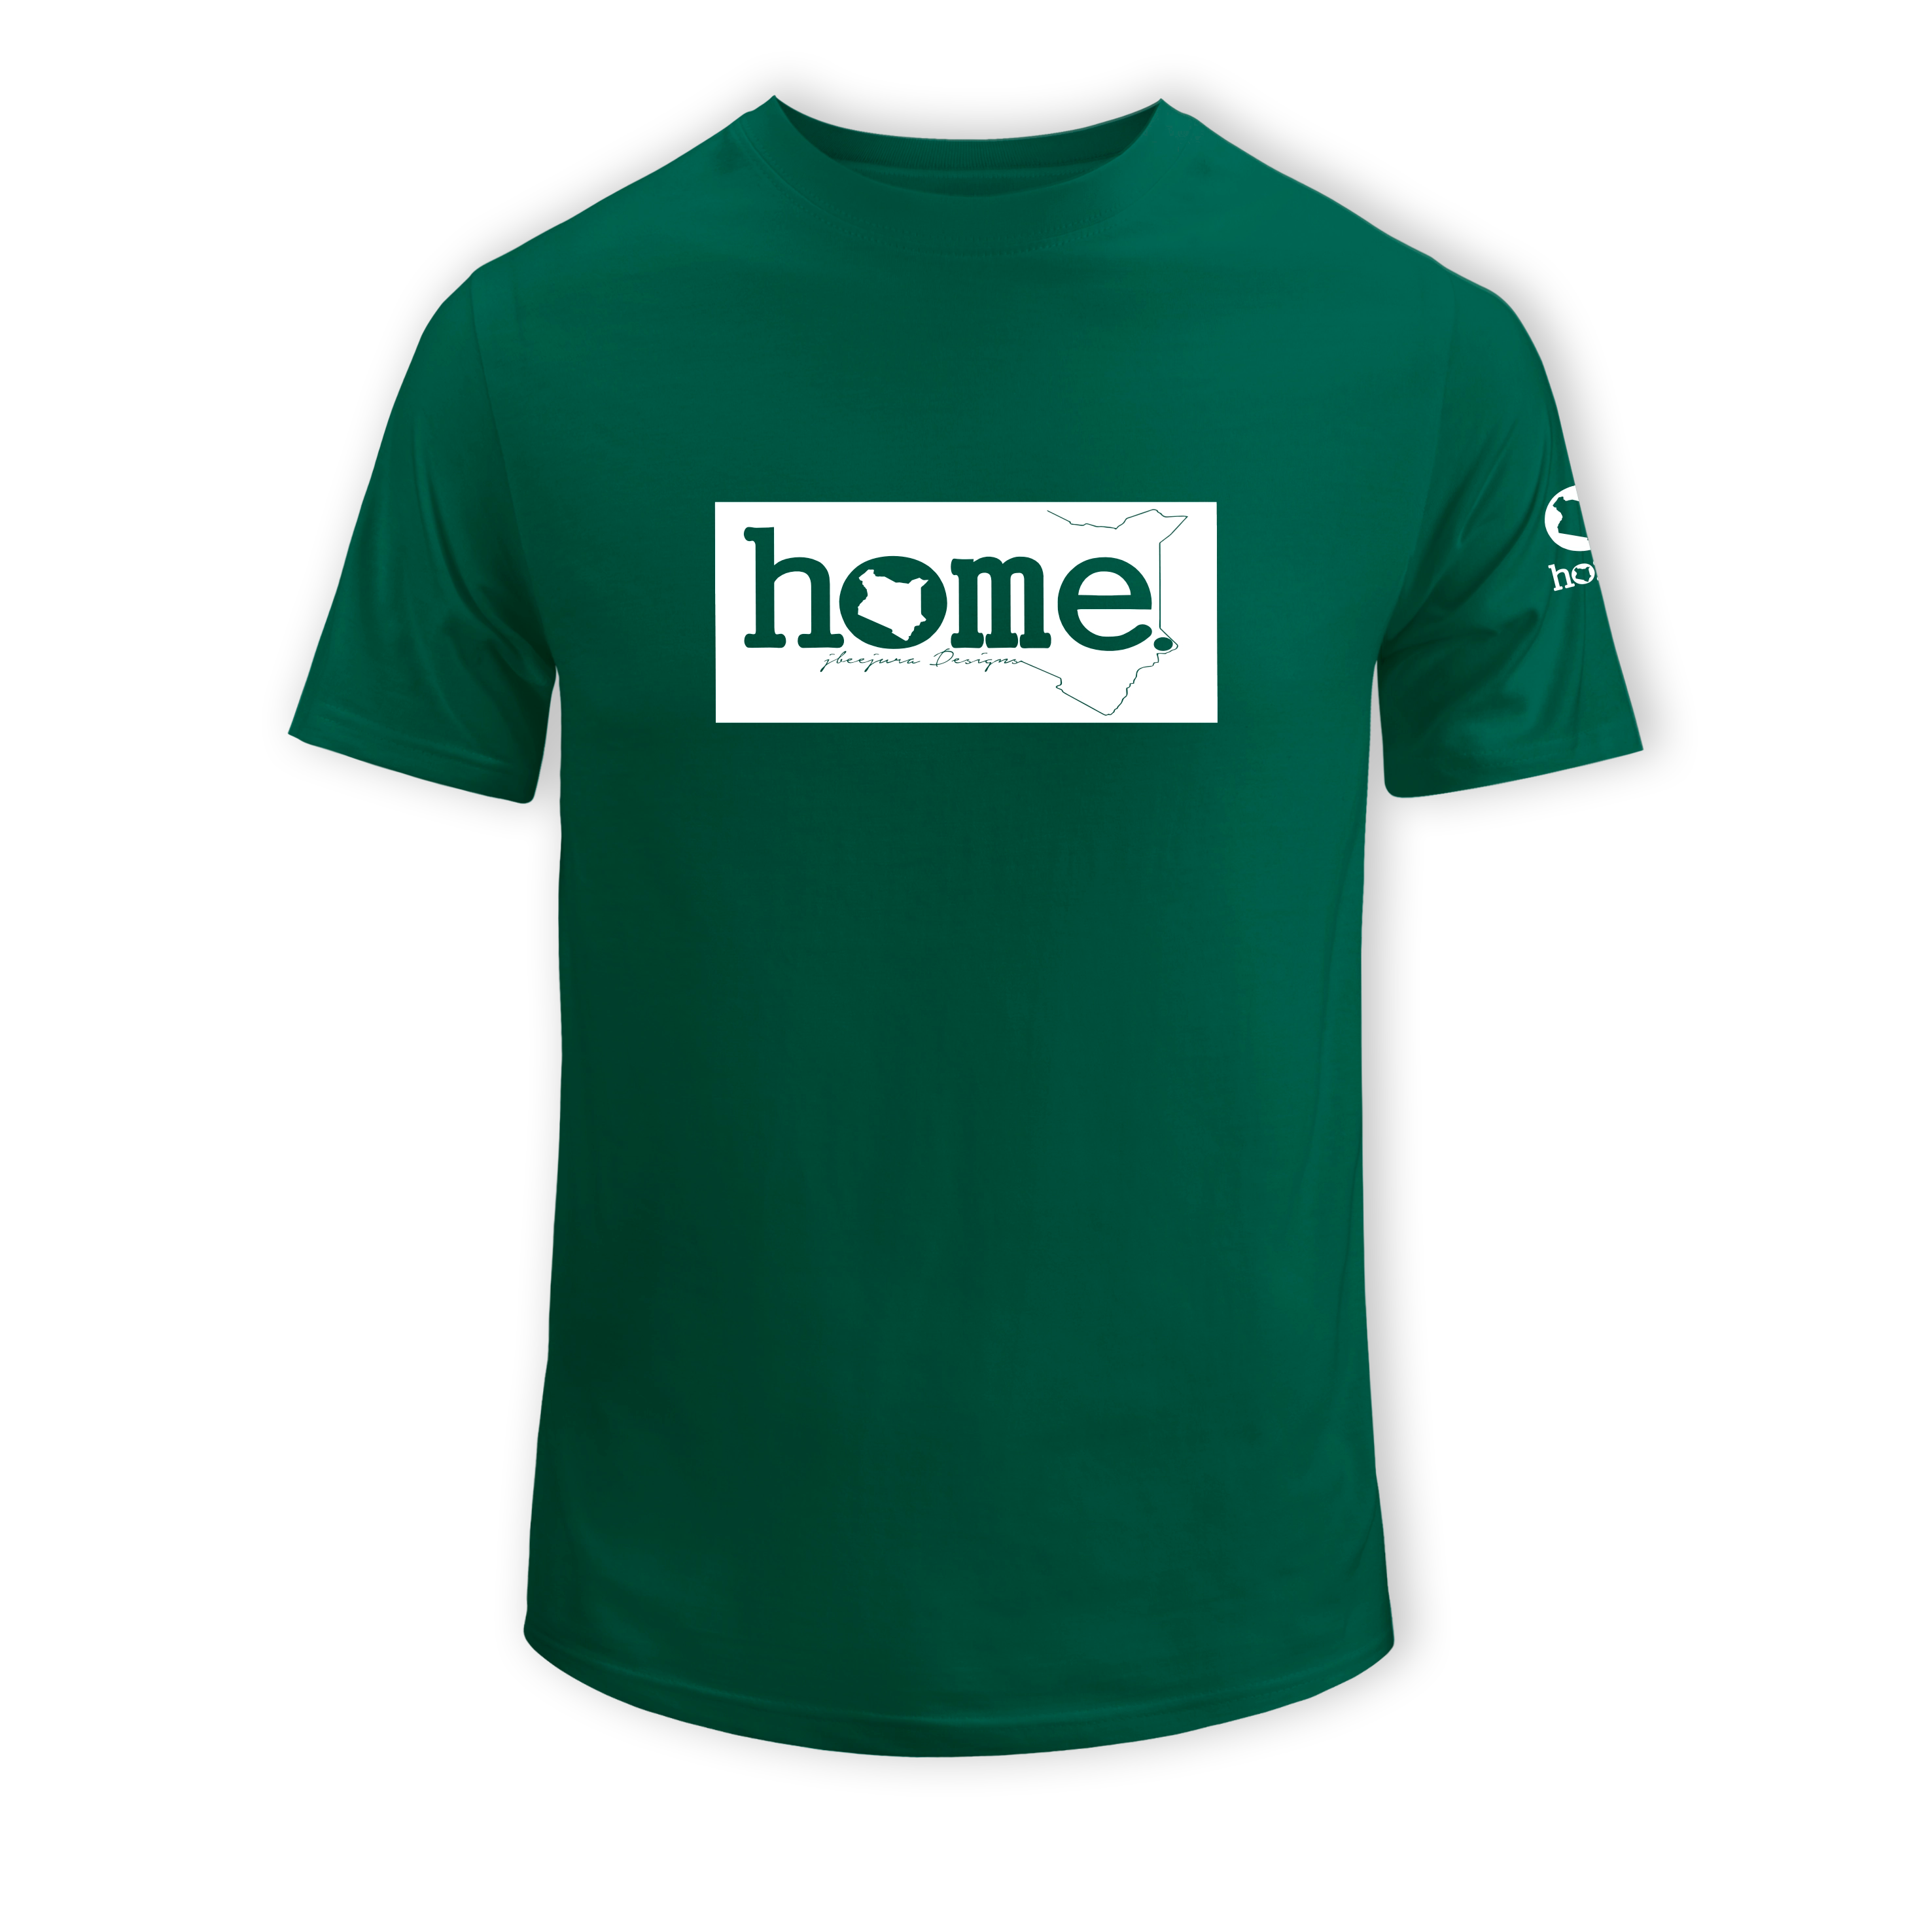 home_254 SHORT-SLEEVED RICH GREEN T-SHIRT WITH A WHITE CLASSIC PRINT – COTTON PLUS FABRIC